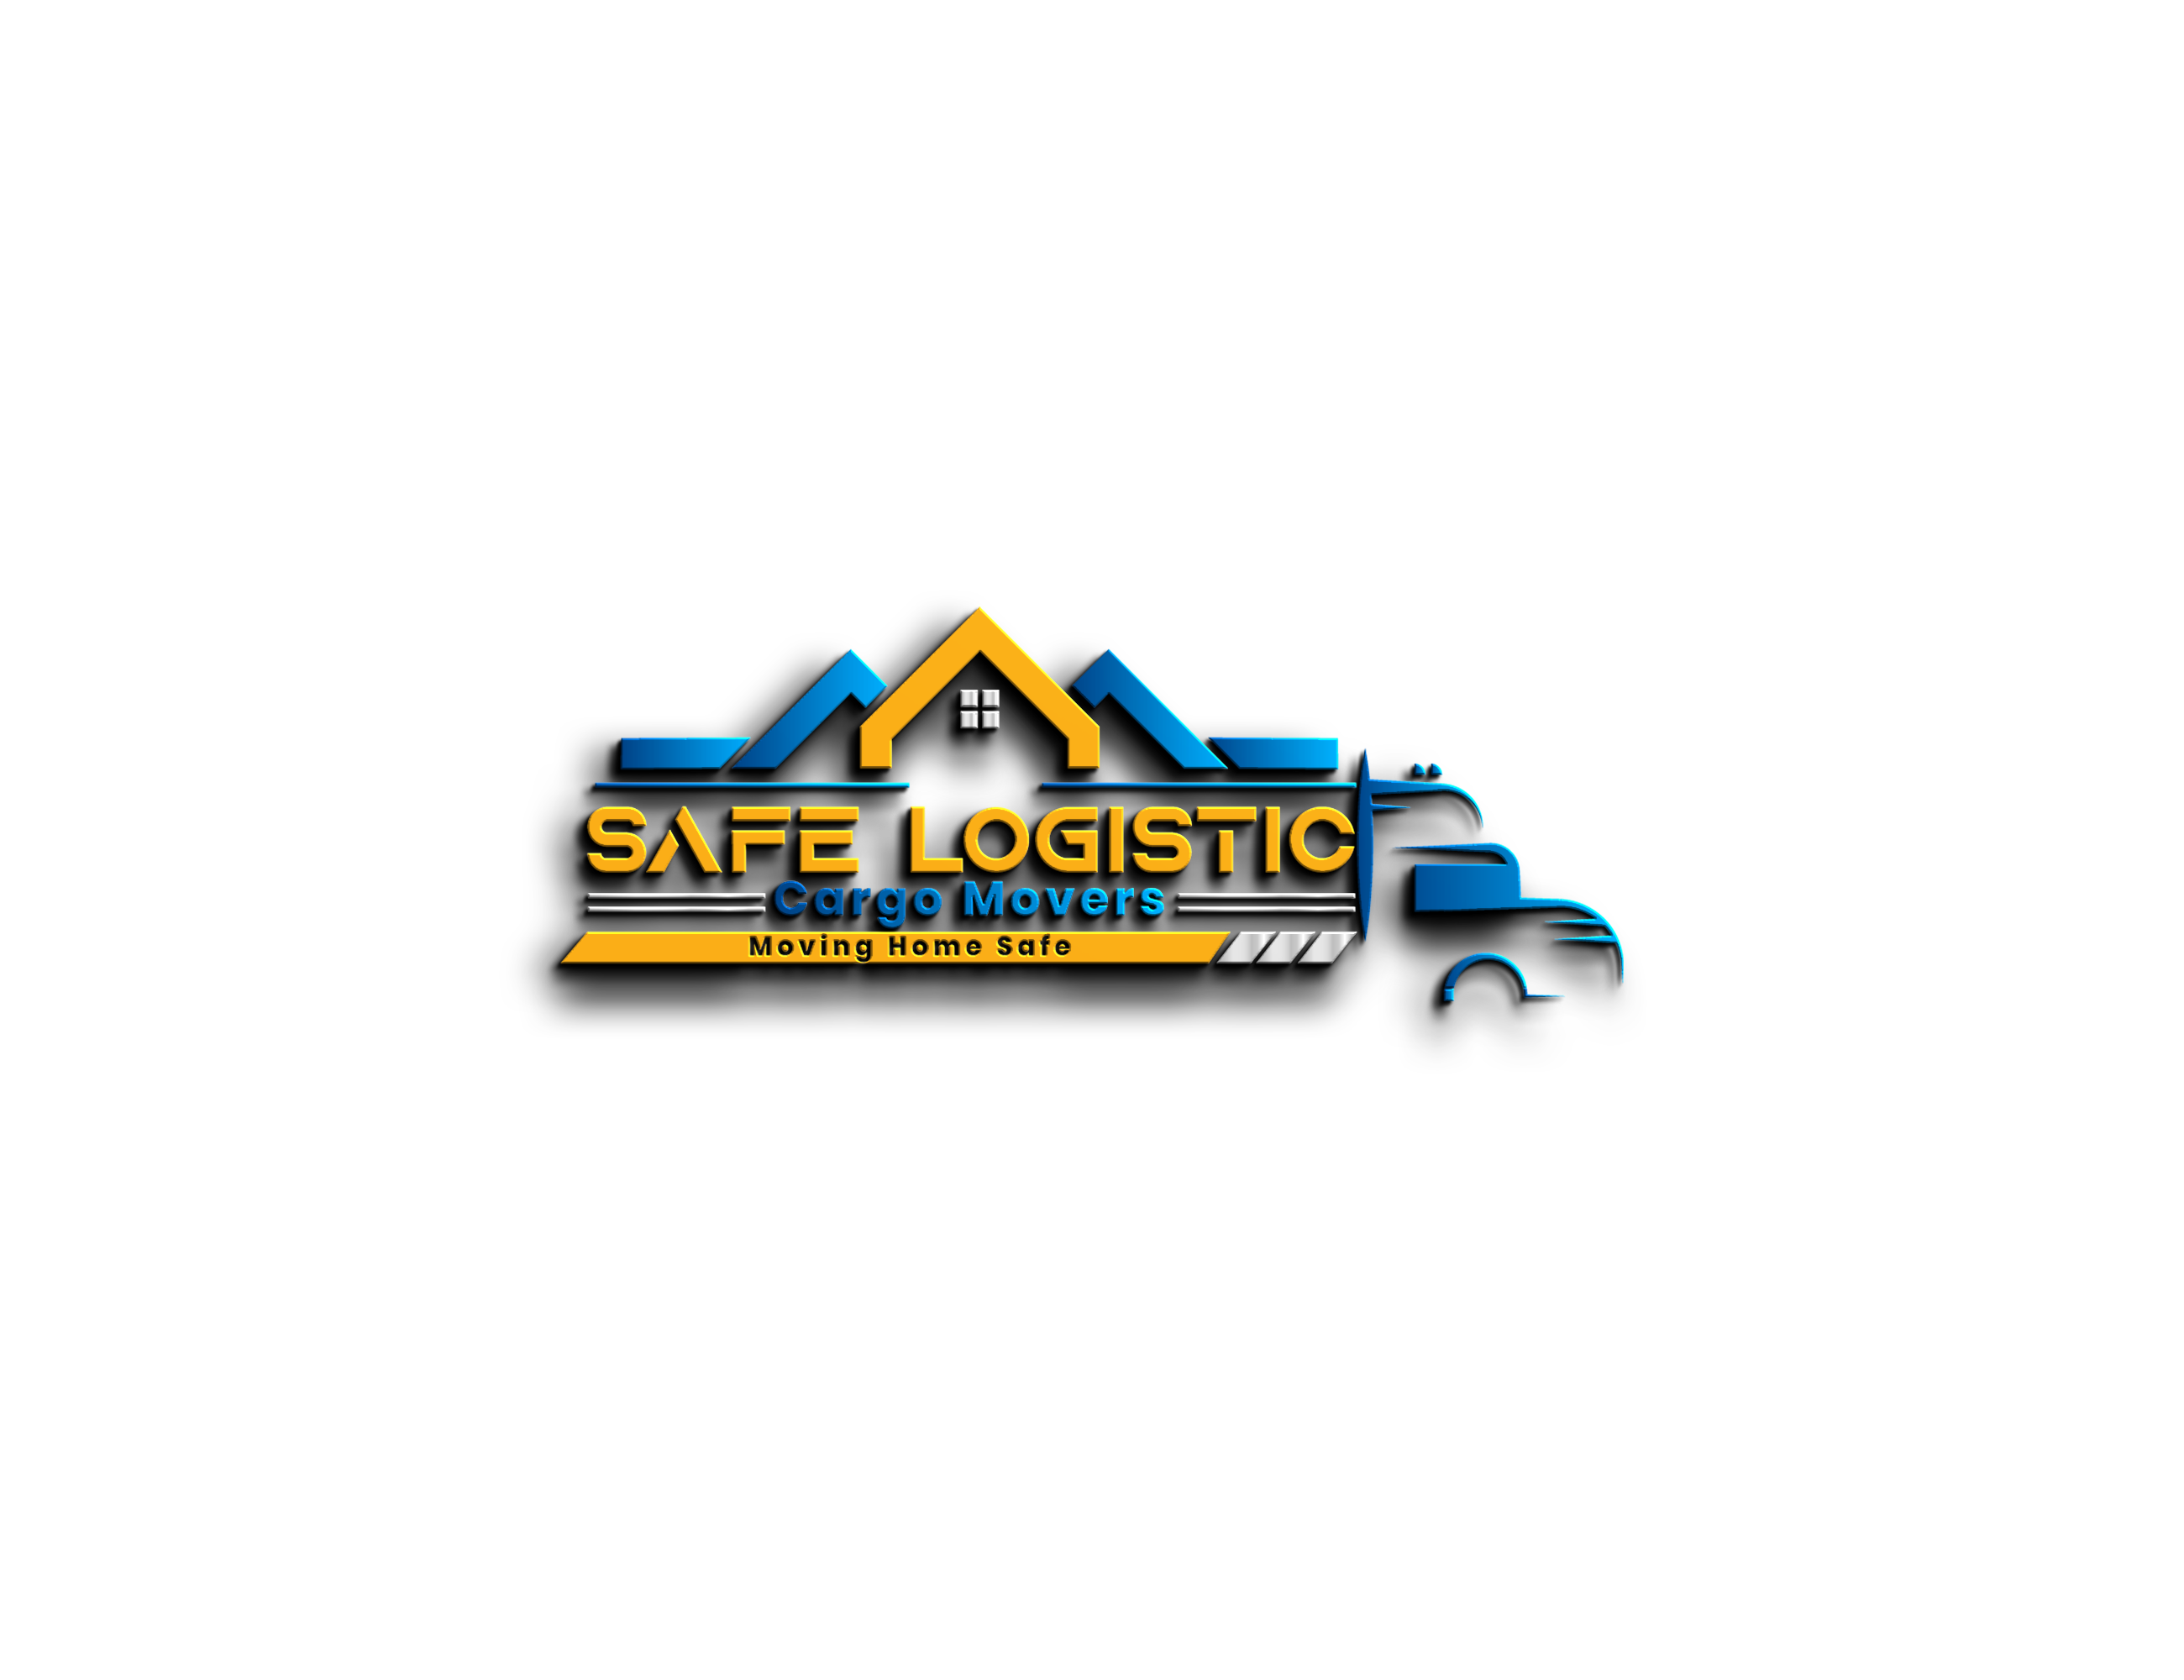 Safe Logistic Cargo Movers